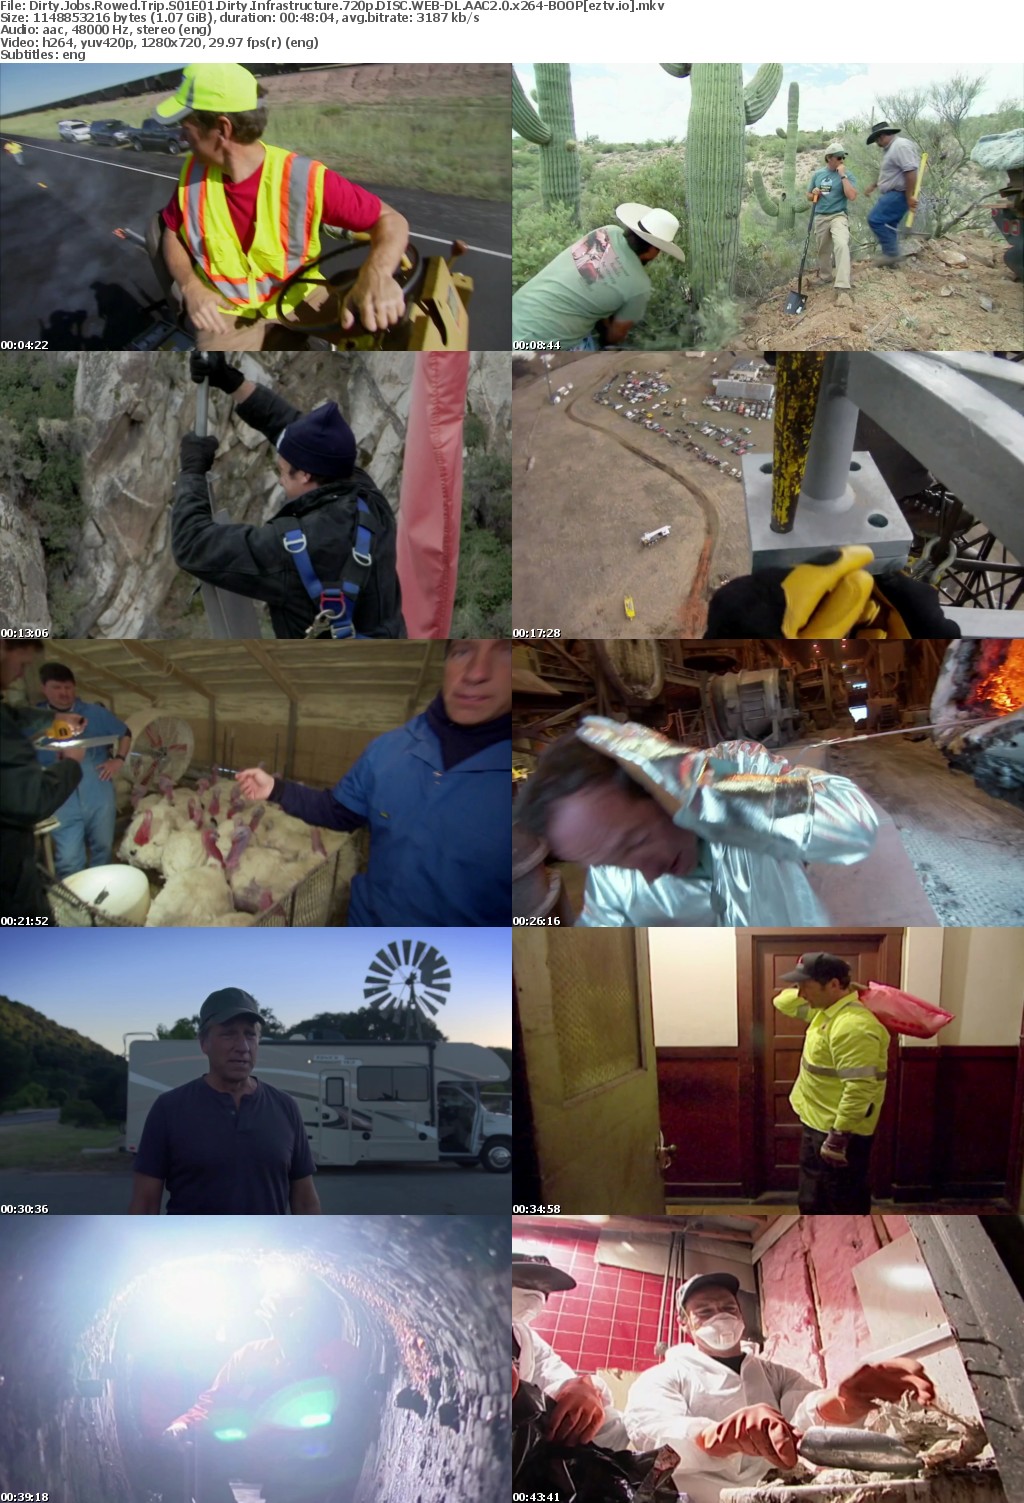 Dirty Jobs Rowed Trip S01E01 Dirty Infrastructure 720p DISC WEB-DL AAC2 0 x264-BOOP